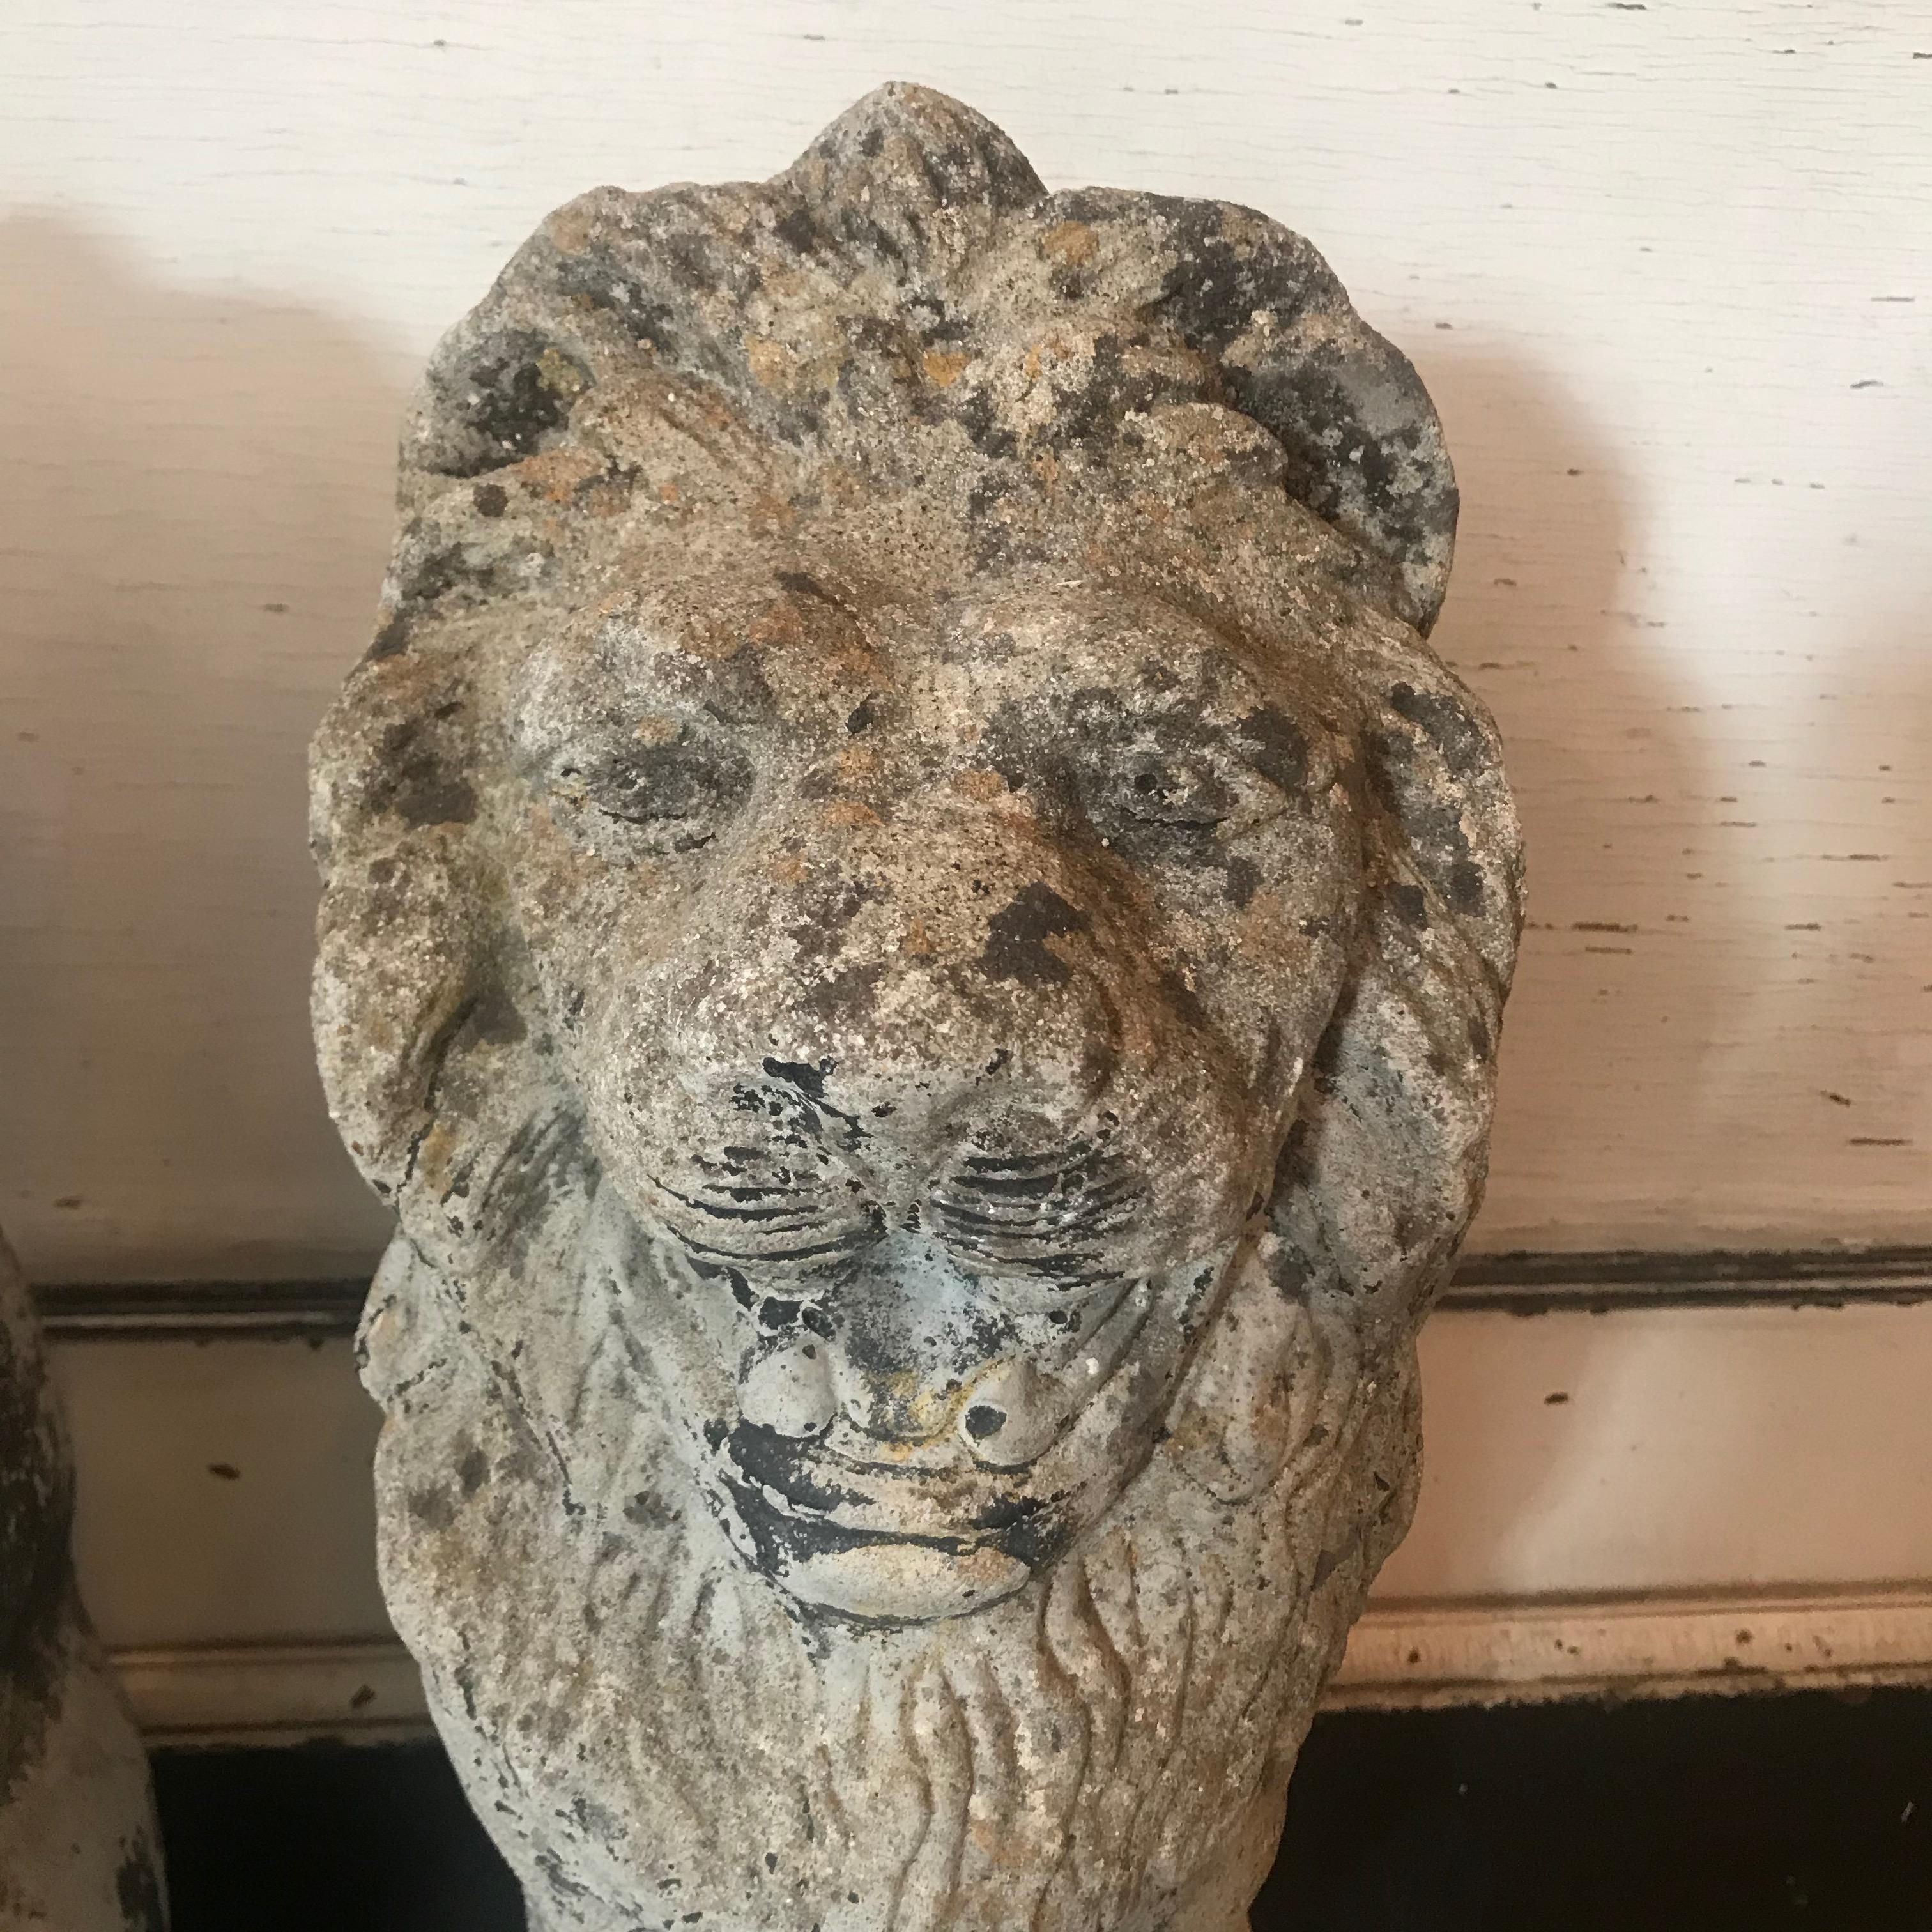 Beautiful French refined garden lion statues, circa 1900, bought in France, perfect for embellishing an important garden. The stone shows sign of the passage of time, and the pair of majestic lions will charm your guests with their majesty.